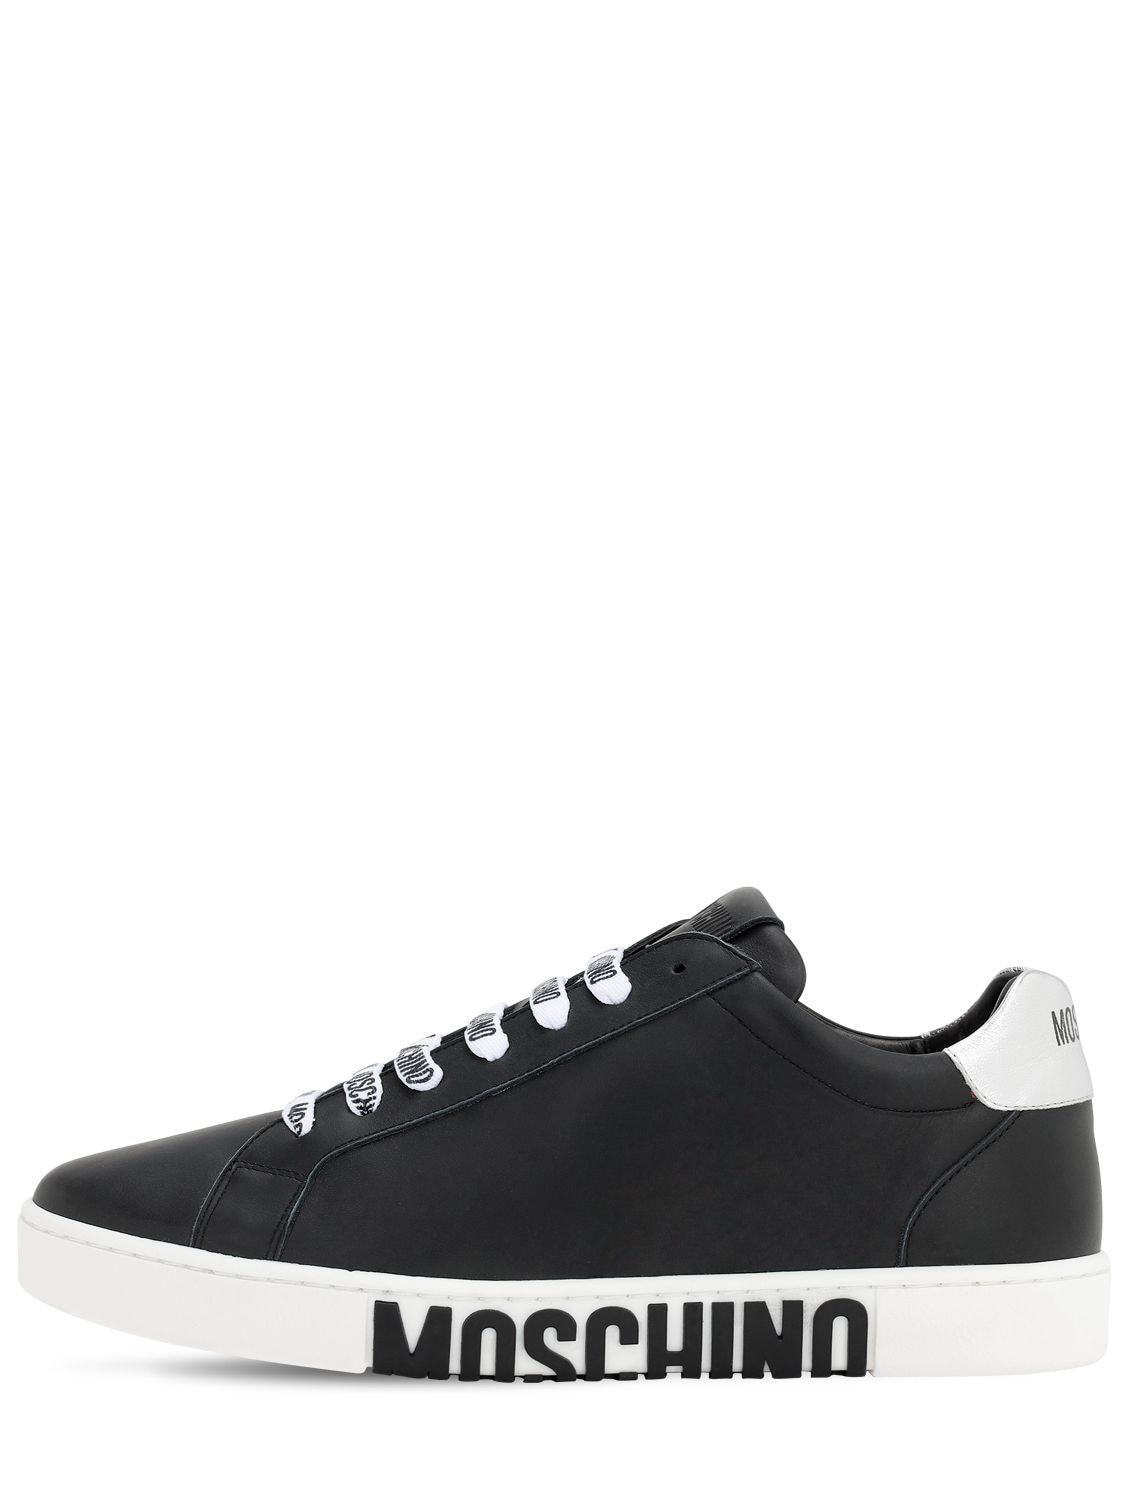 moschino shoes mens